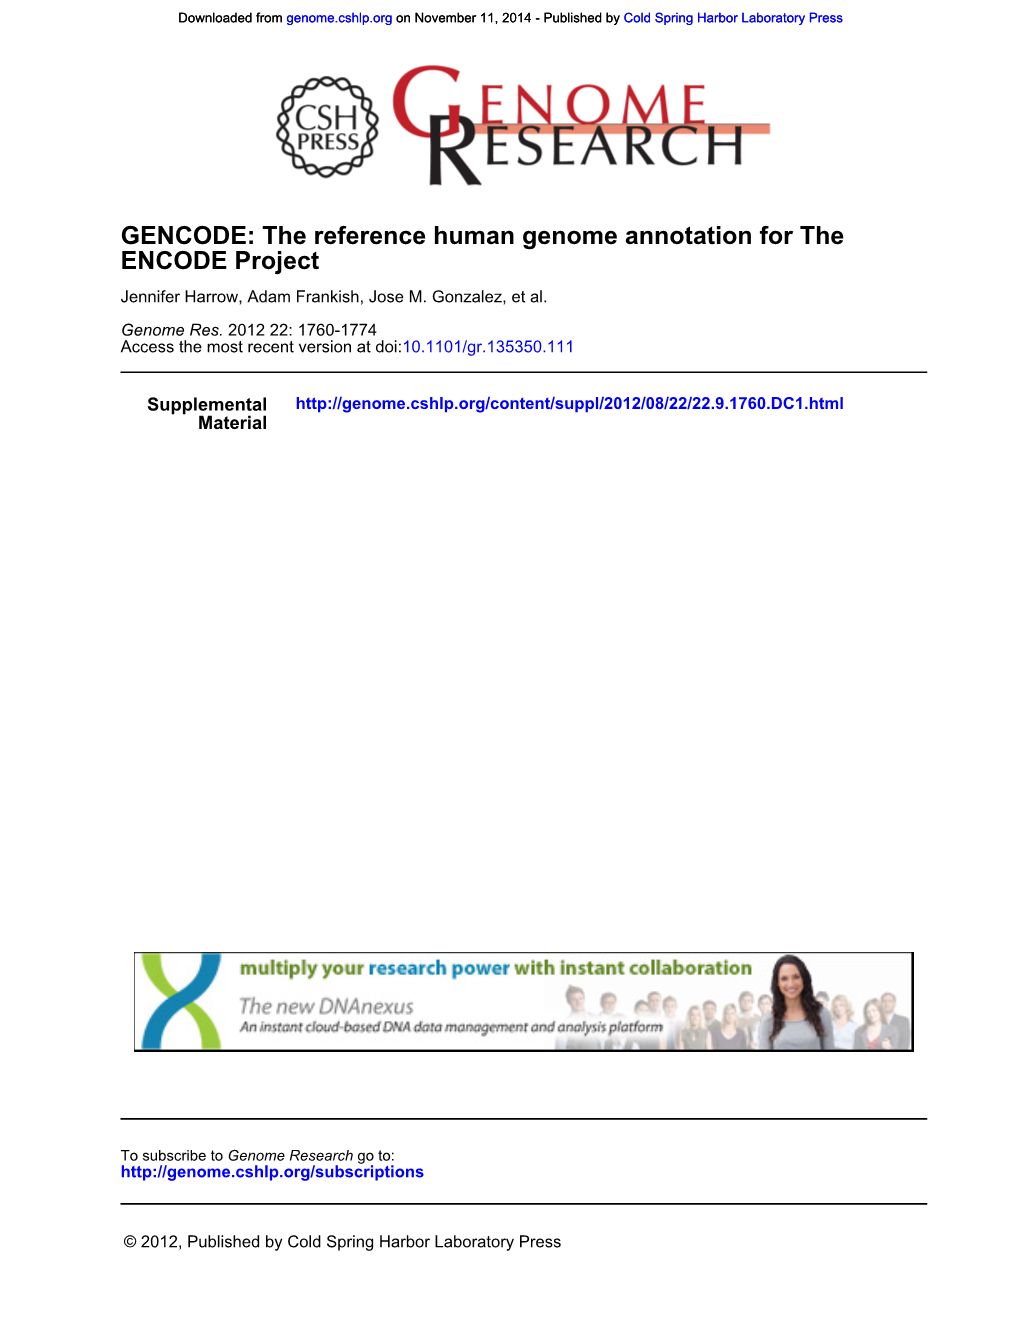 ENCODE Project GENCODE: the Reference Human Genome